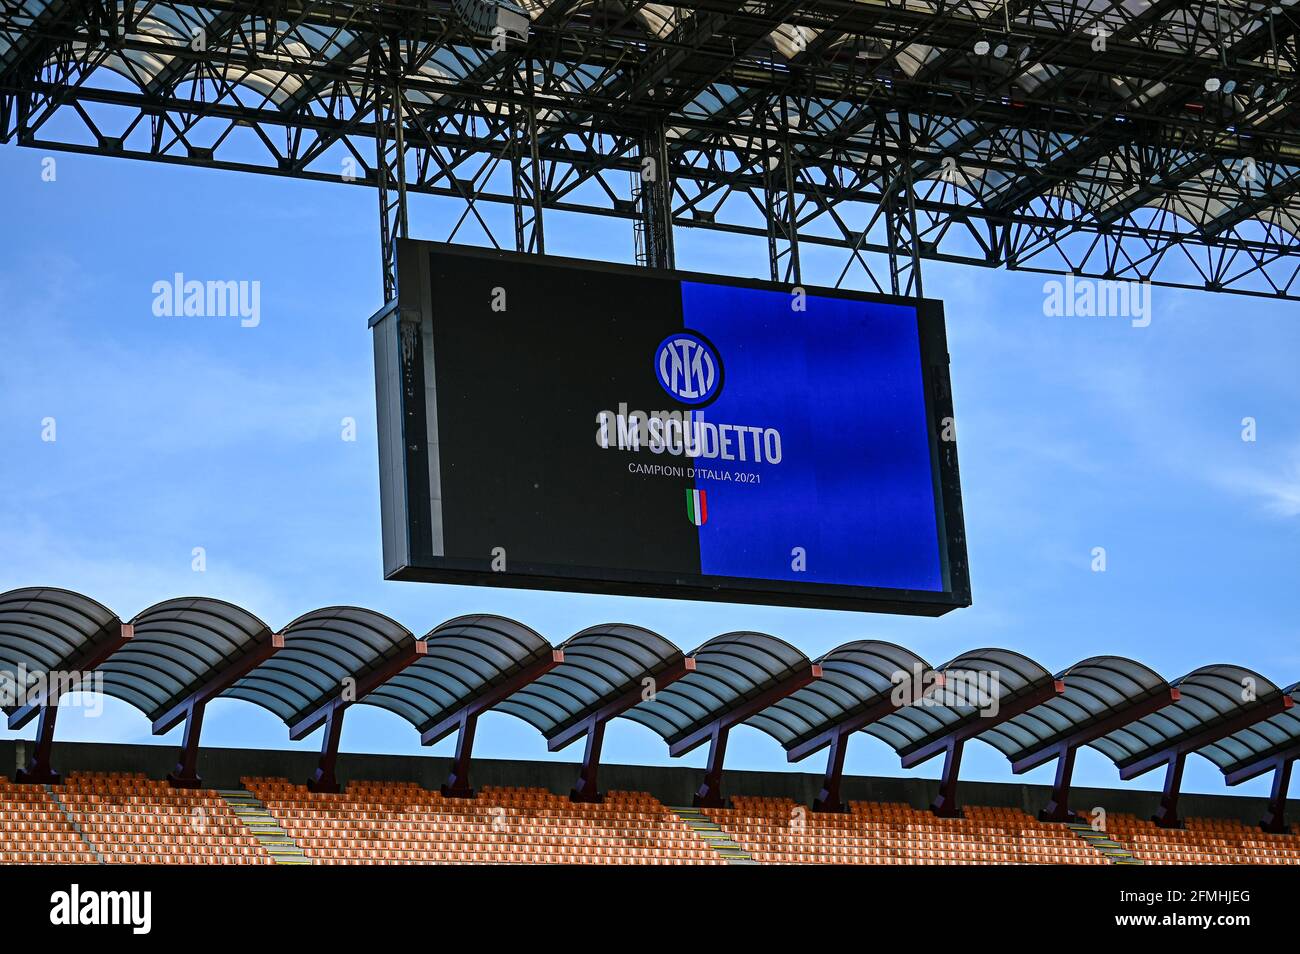 Milan, Italy. 08 May 2021. 'I M Scudetto' is displayed on the scoreboard to celebrate winning of the Italian Serie A 2020/2021 championship title by FC Internazionale prior to the Serie A football match between FC Internazionale and UC Sampdoria. FC Internazionale won 5-1 over UC Sampdoria. Credit: Nicolò Campo/Alamy Live News Stock Photo